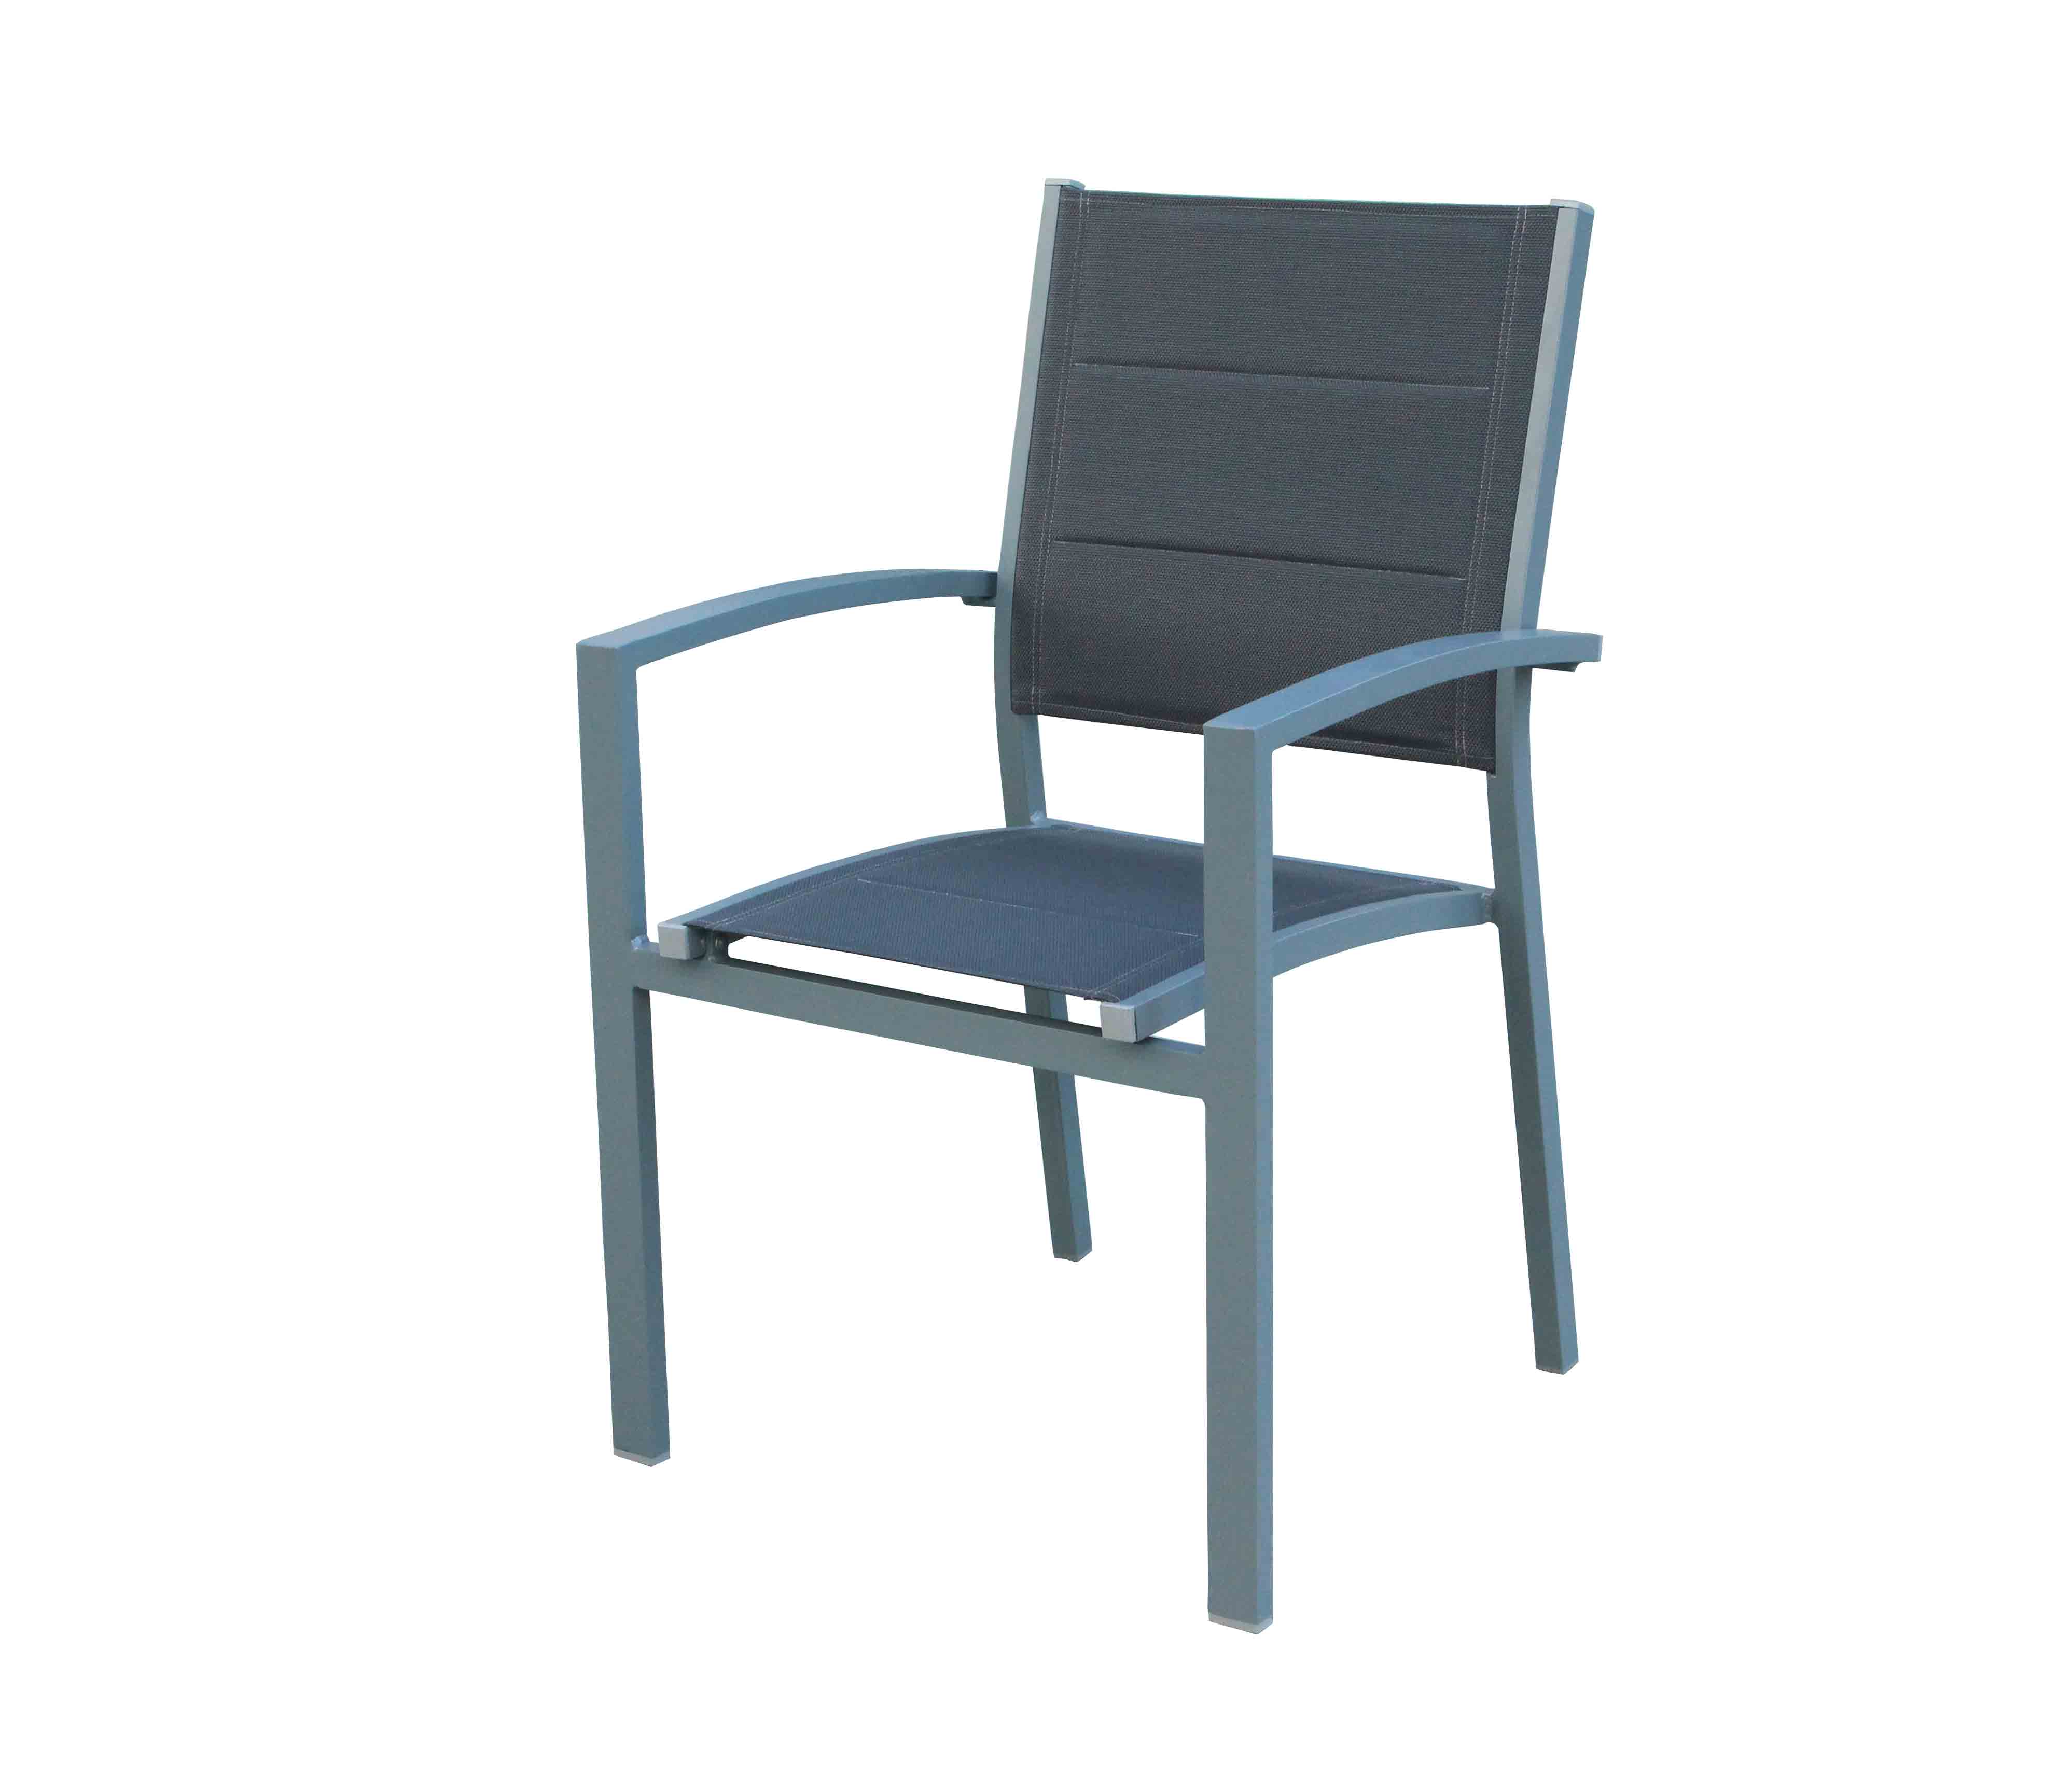 Cheap PriceList for Folding Beach Table - JJC417 Aluminum textilene stacking chair with armrest – Jin-jiang Industry